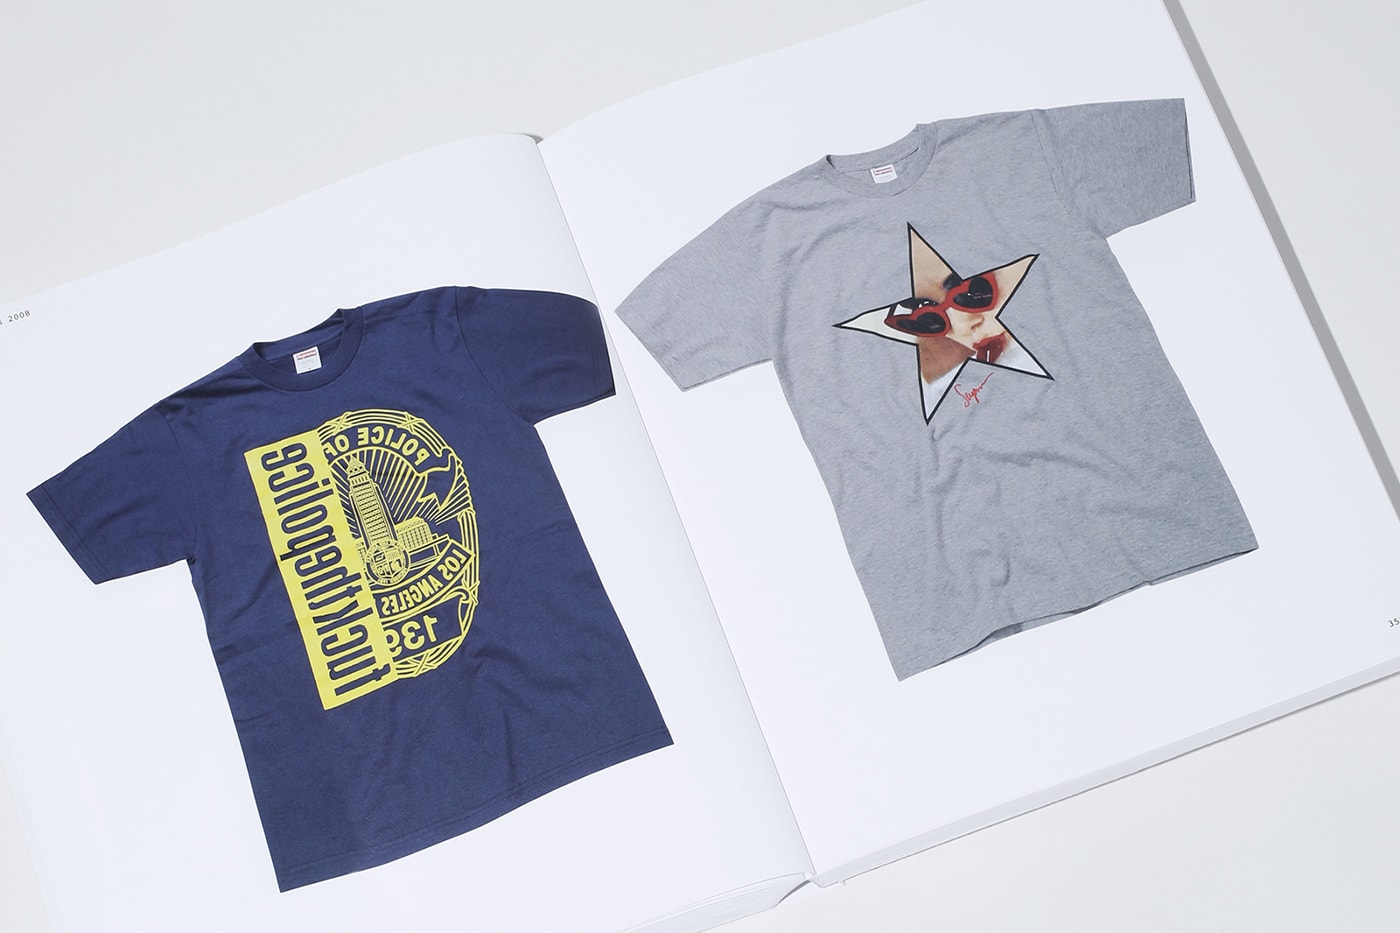 Supreme '30 Years: T-Shirts 1994-2024' Book release info